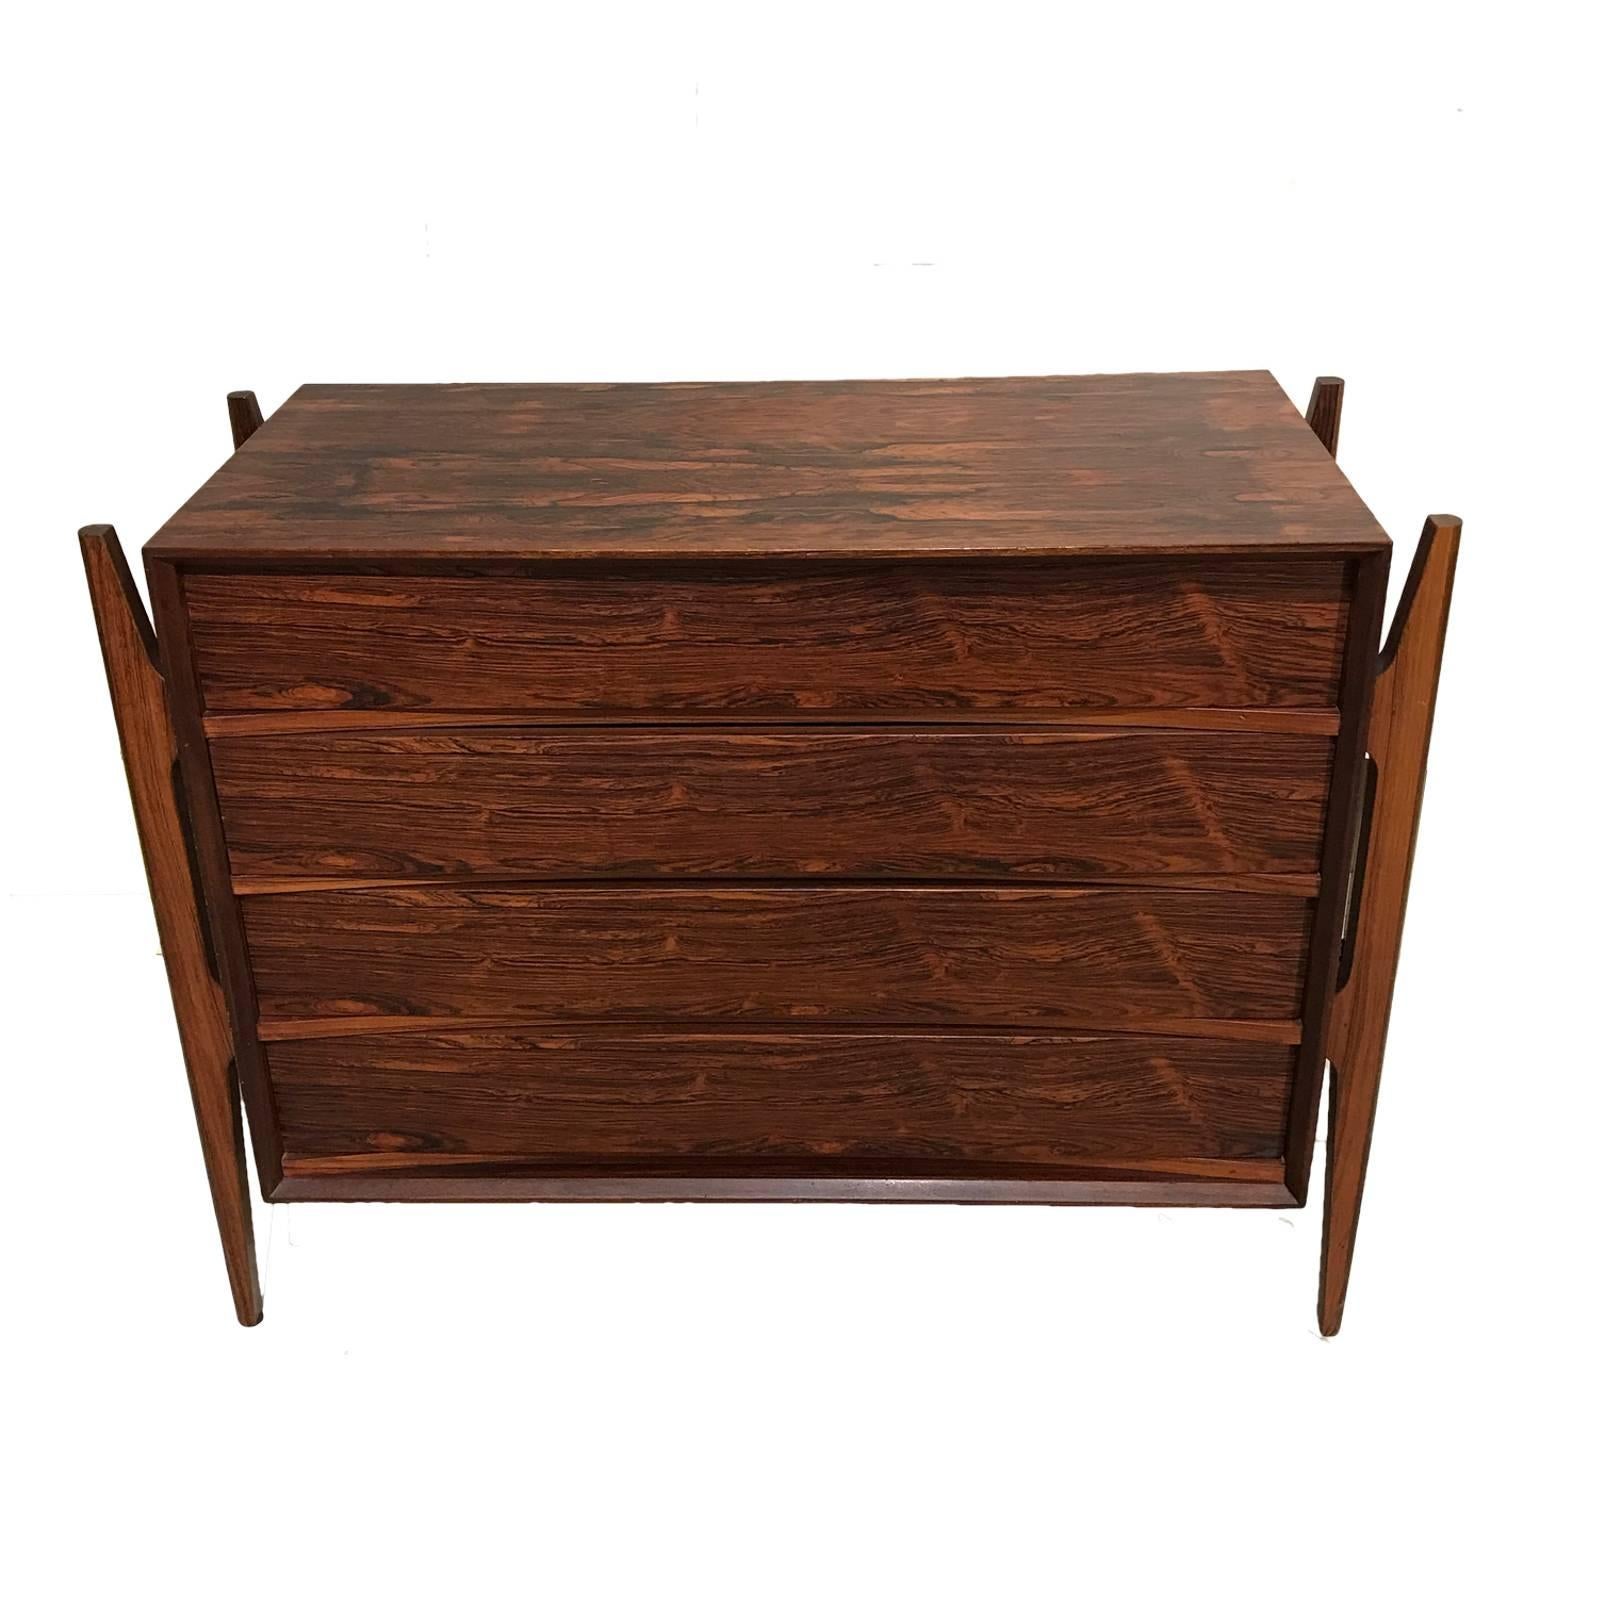 Stunning and rare four-drawer rosewood dresser situated on rosewood stilts. Sculptural design.